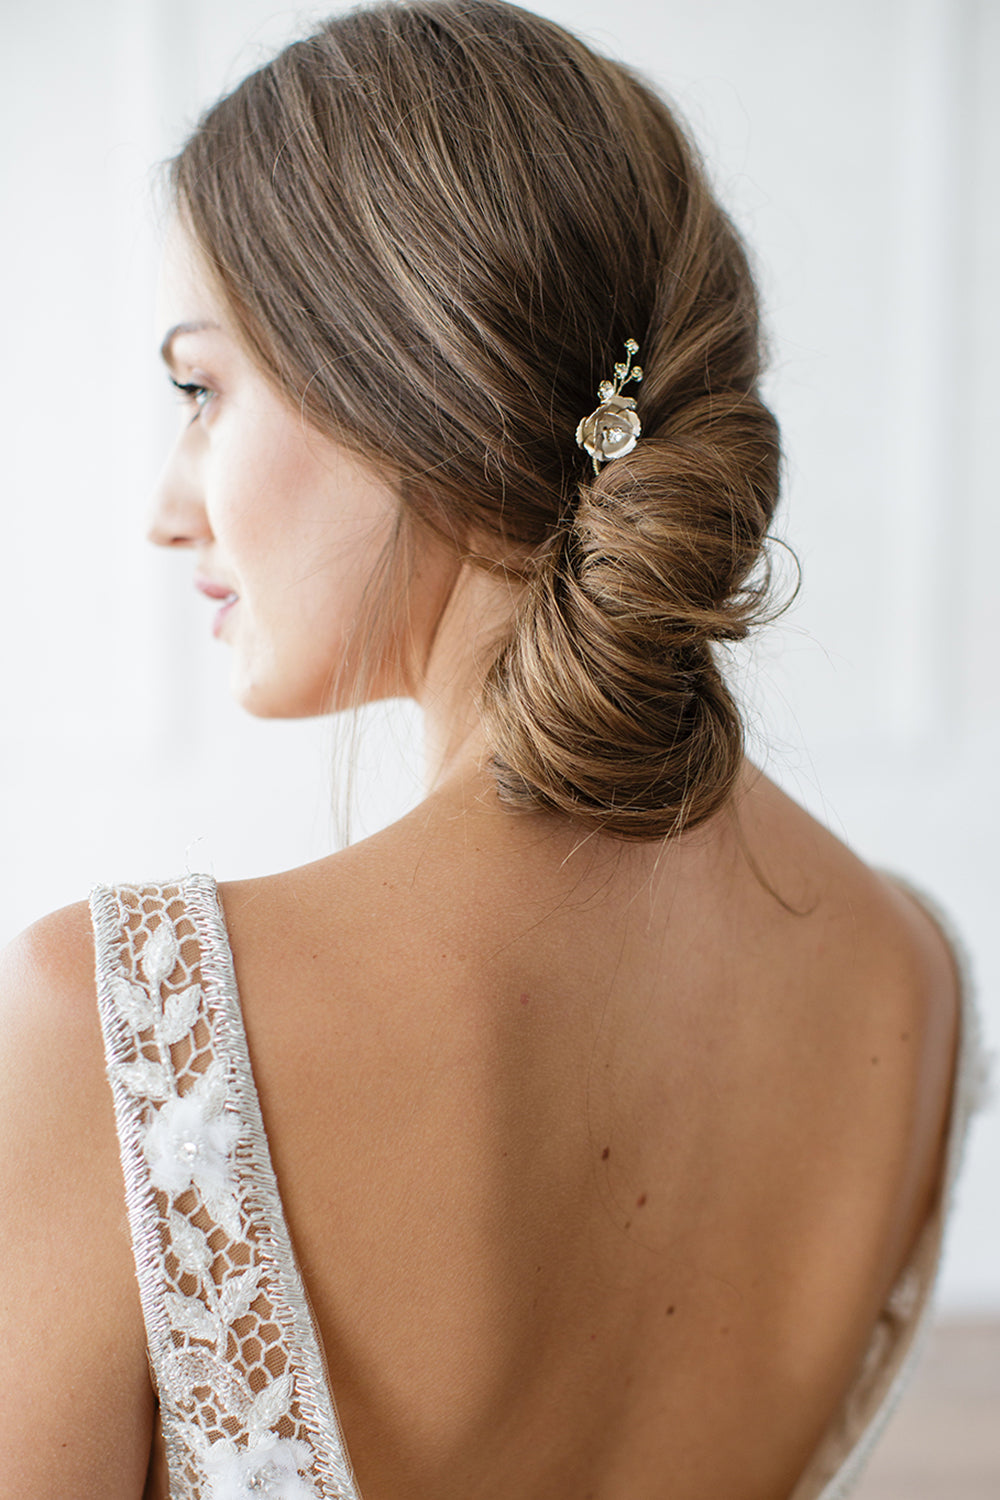 https://cdn.shopify.com/s/files/1/0075/9555/6982/files/how_to_choose_the_right_bridal_hair_accessory_1.jpg?7405044932180402369